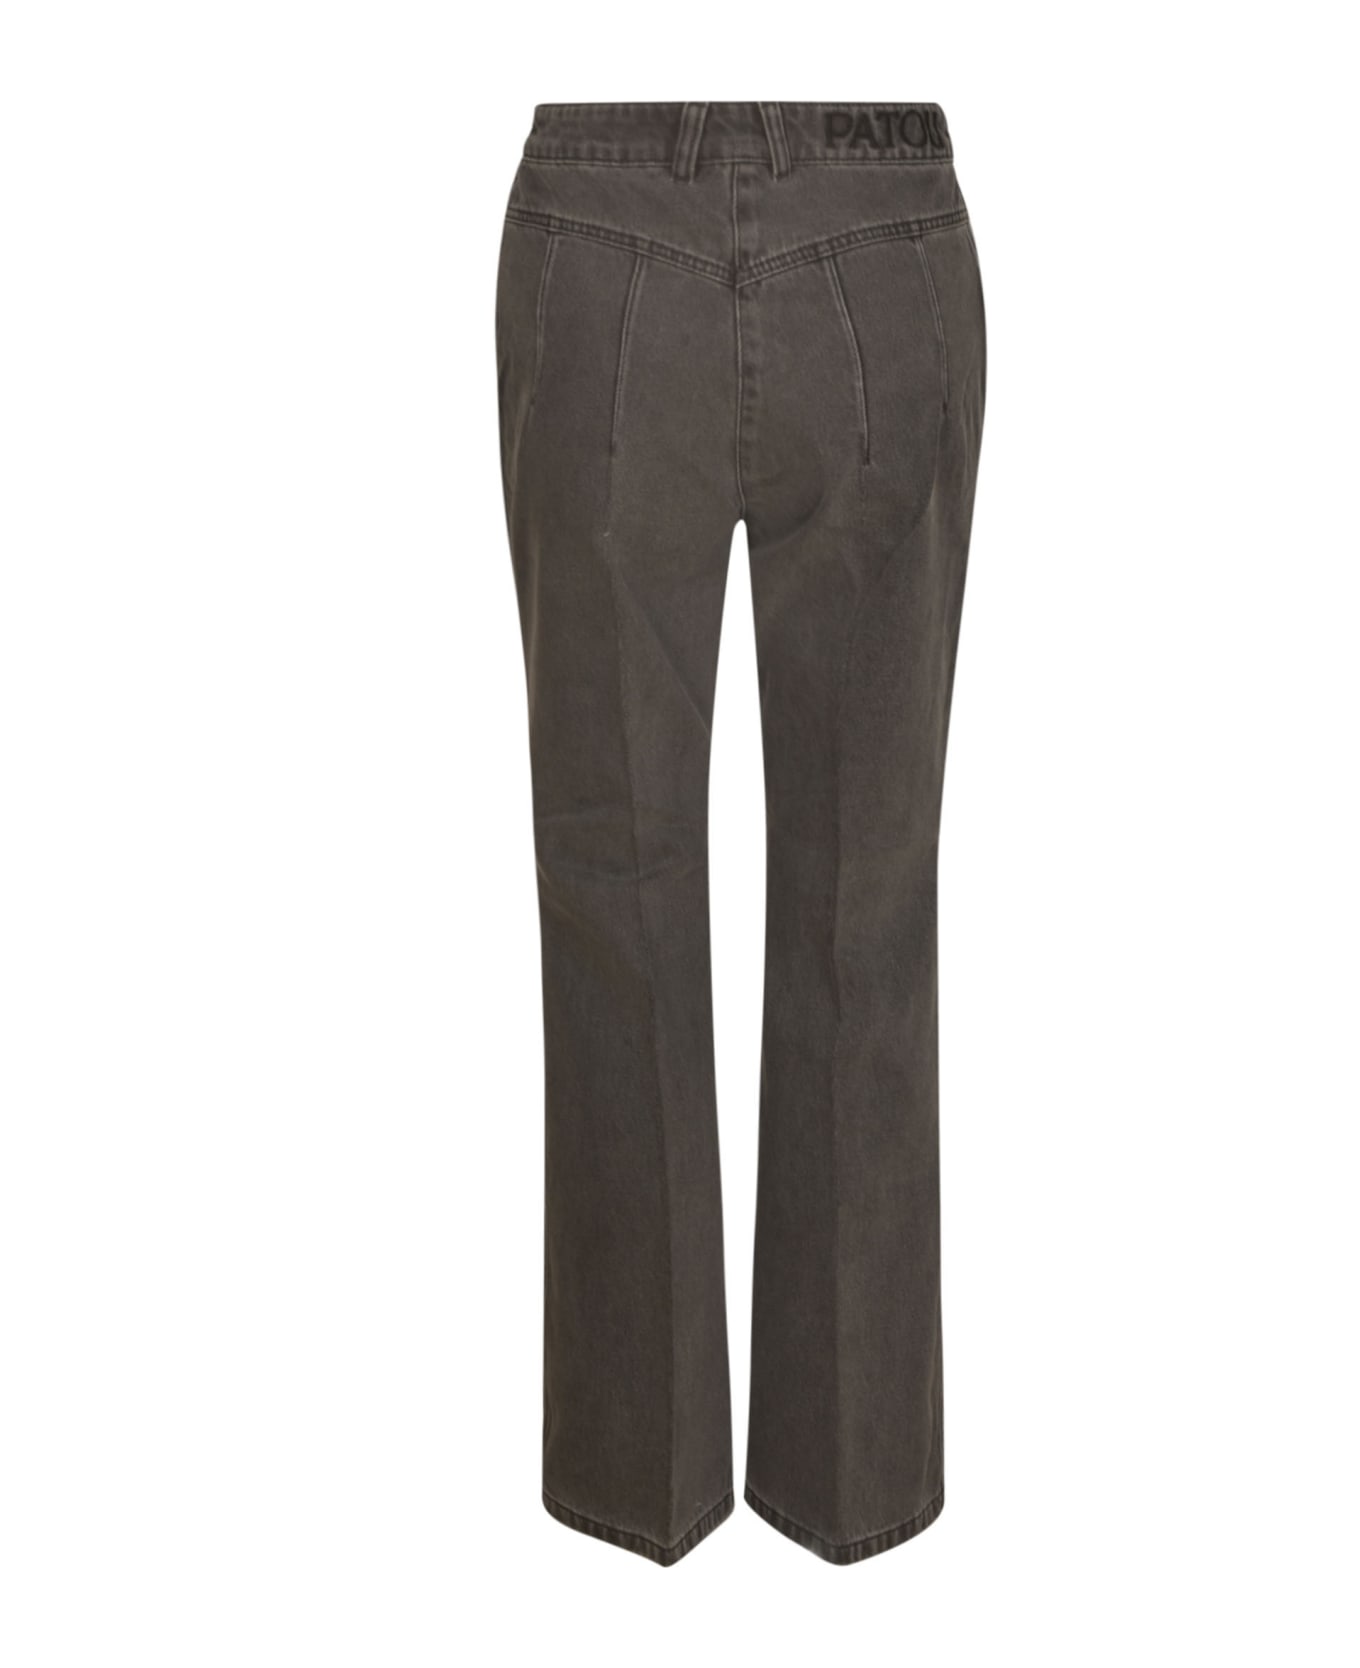 Patou Button Fitted Jeans - Grey